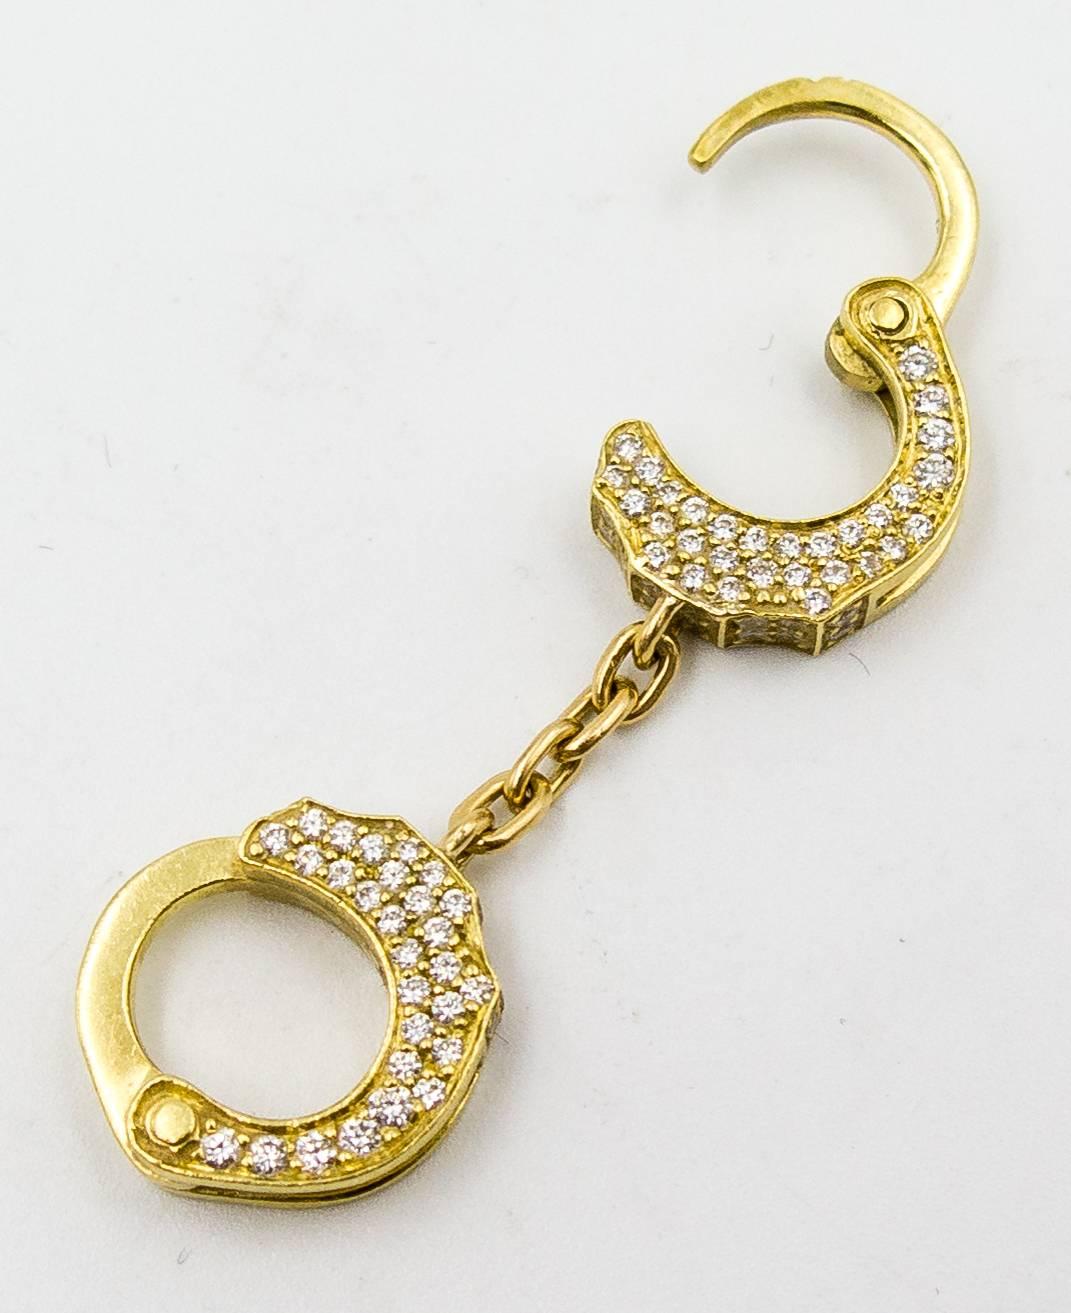 For the buyer with non-traditional tastes, this unusual pendant is worth a second glance.  Crafted in 18 karat gold and pave set with tiny accent diamonds totalling about 1 carat, the cuffs open on one side but remain closed at the other.  The